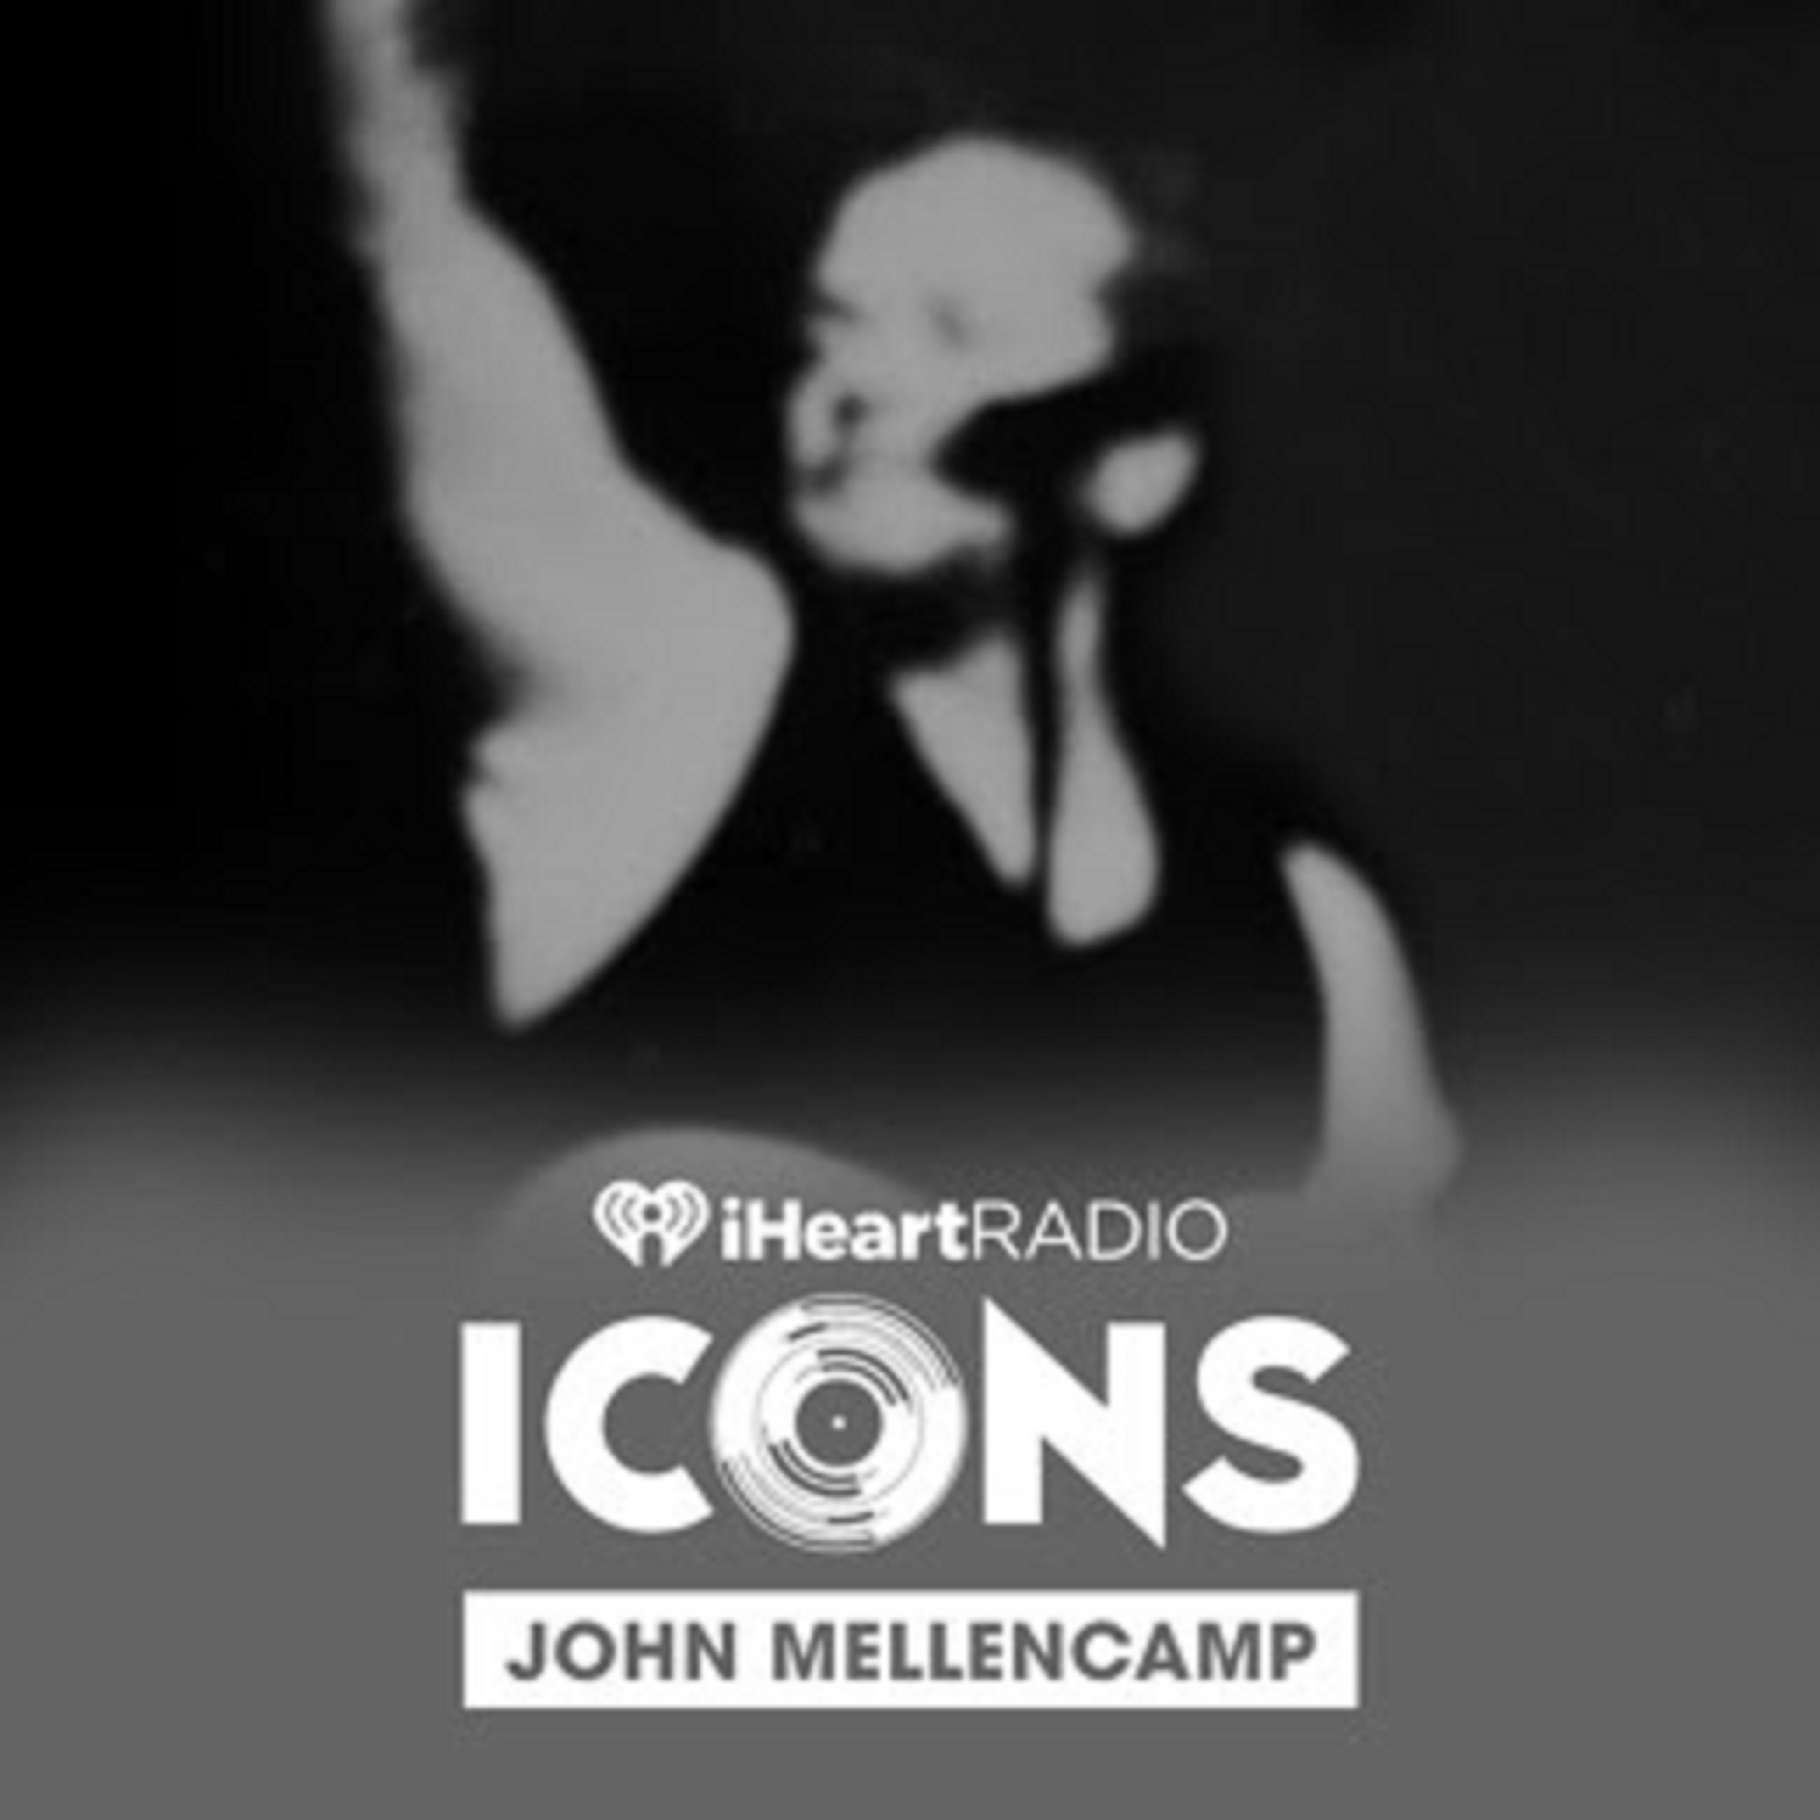 John Mellencamp: iHeartRadio ICONS broadcasts live performance + interview from Rock & Roll Hall 5PM ET 9/29